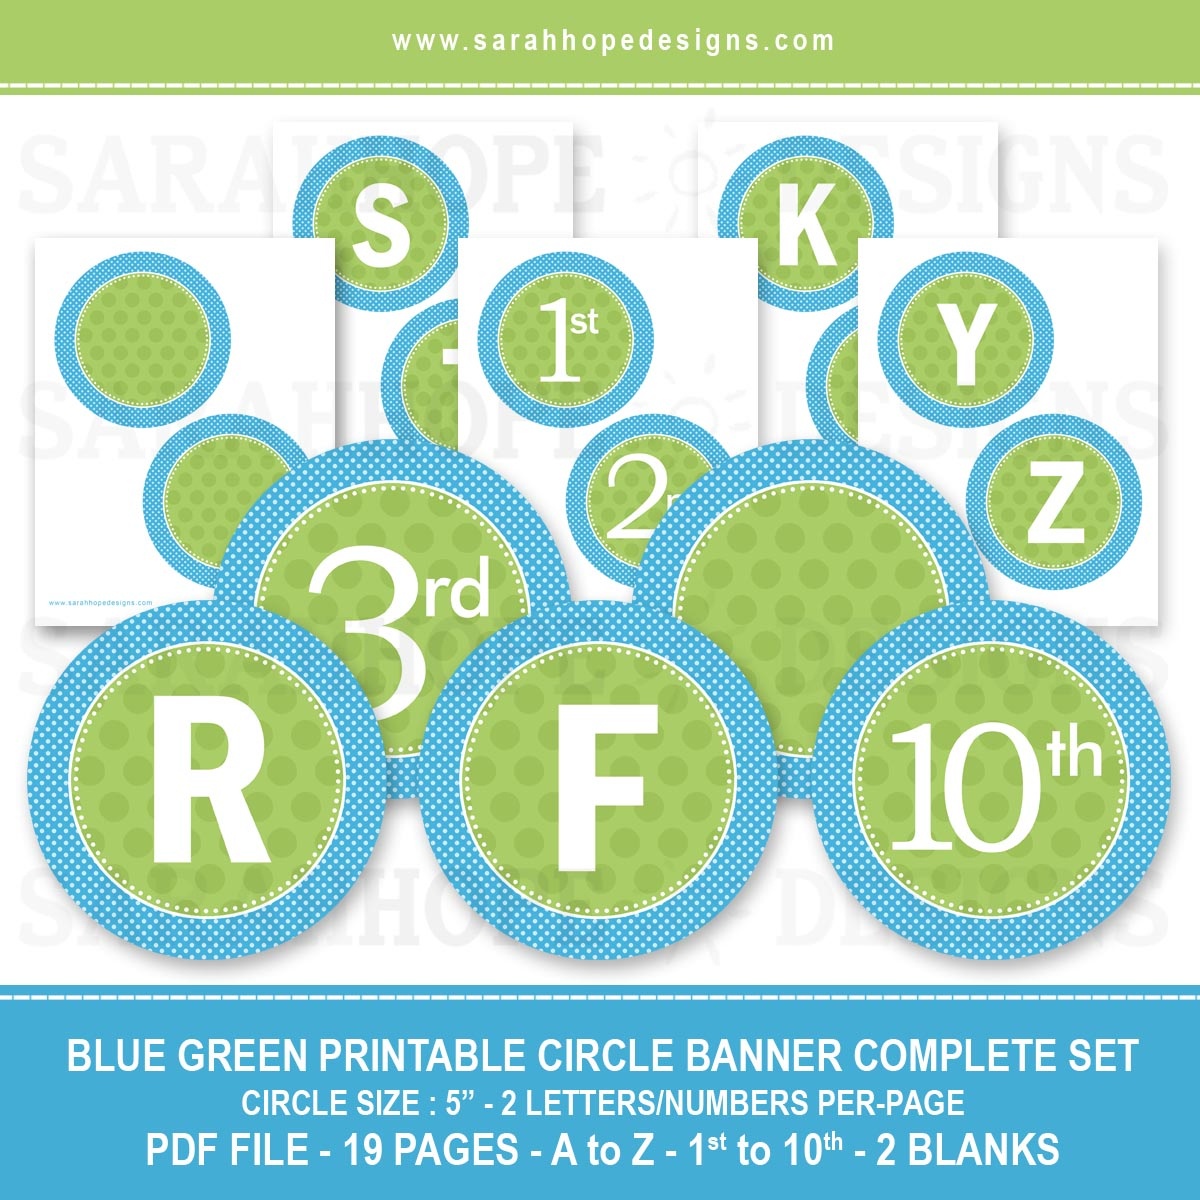 Spell Out Anything With These Free Alphabet Circle Banners From - Free Printable Alphabet Letters For Banners